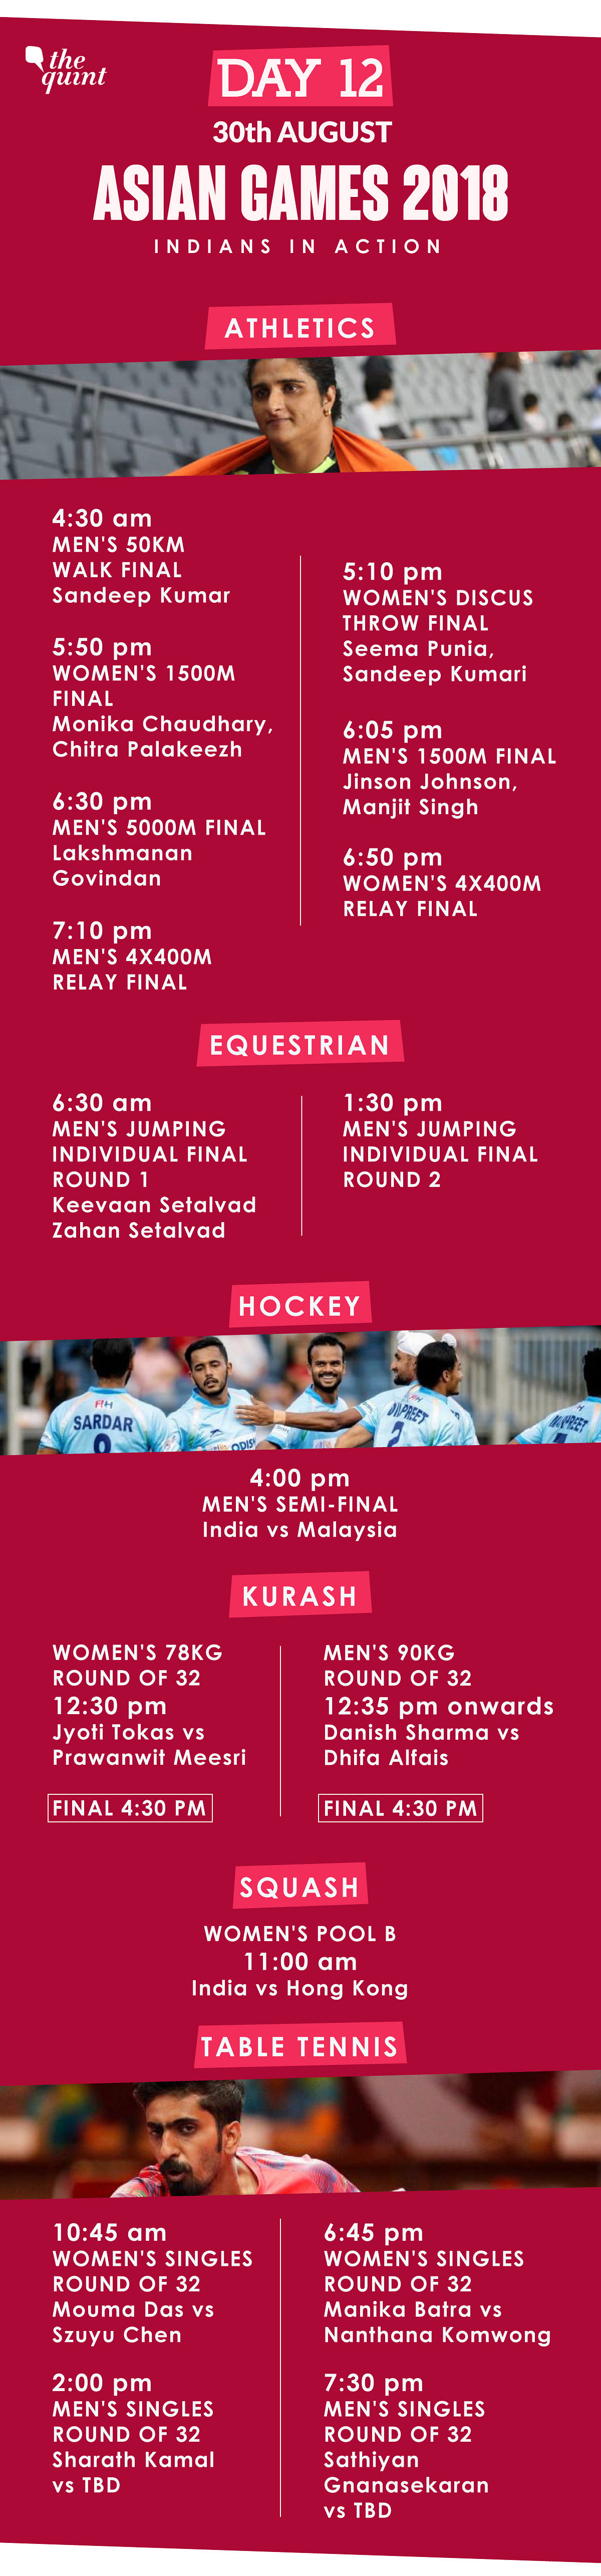 All the major events from Day 12 of the Asian Games 2018 in Indonesia on 30 August.